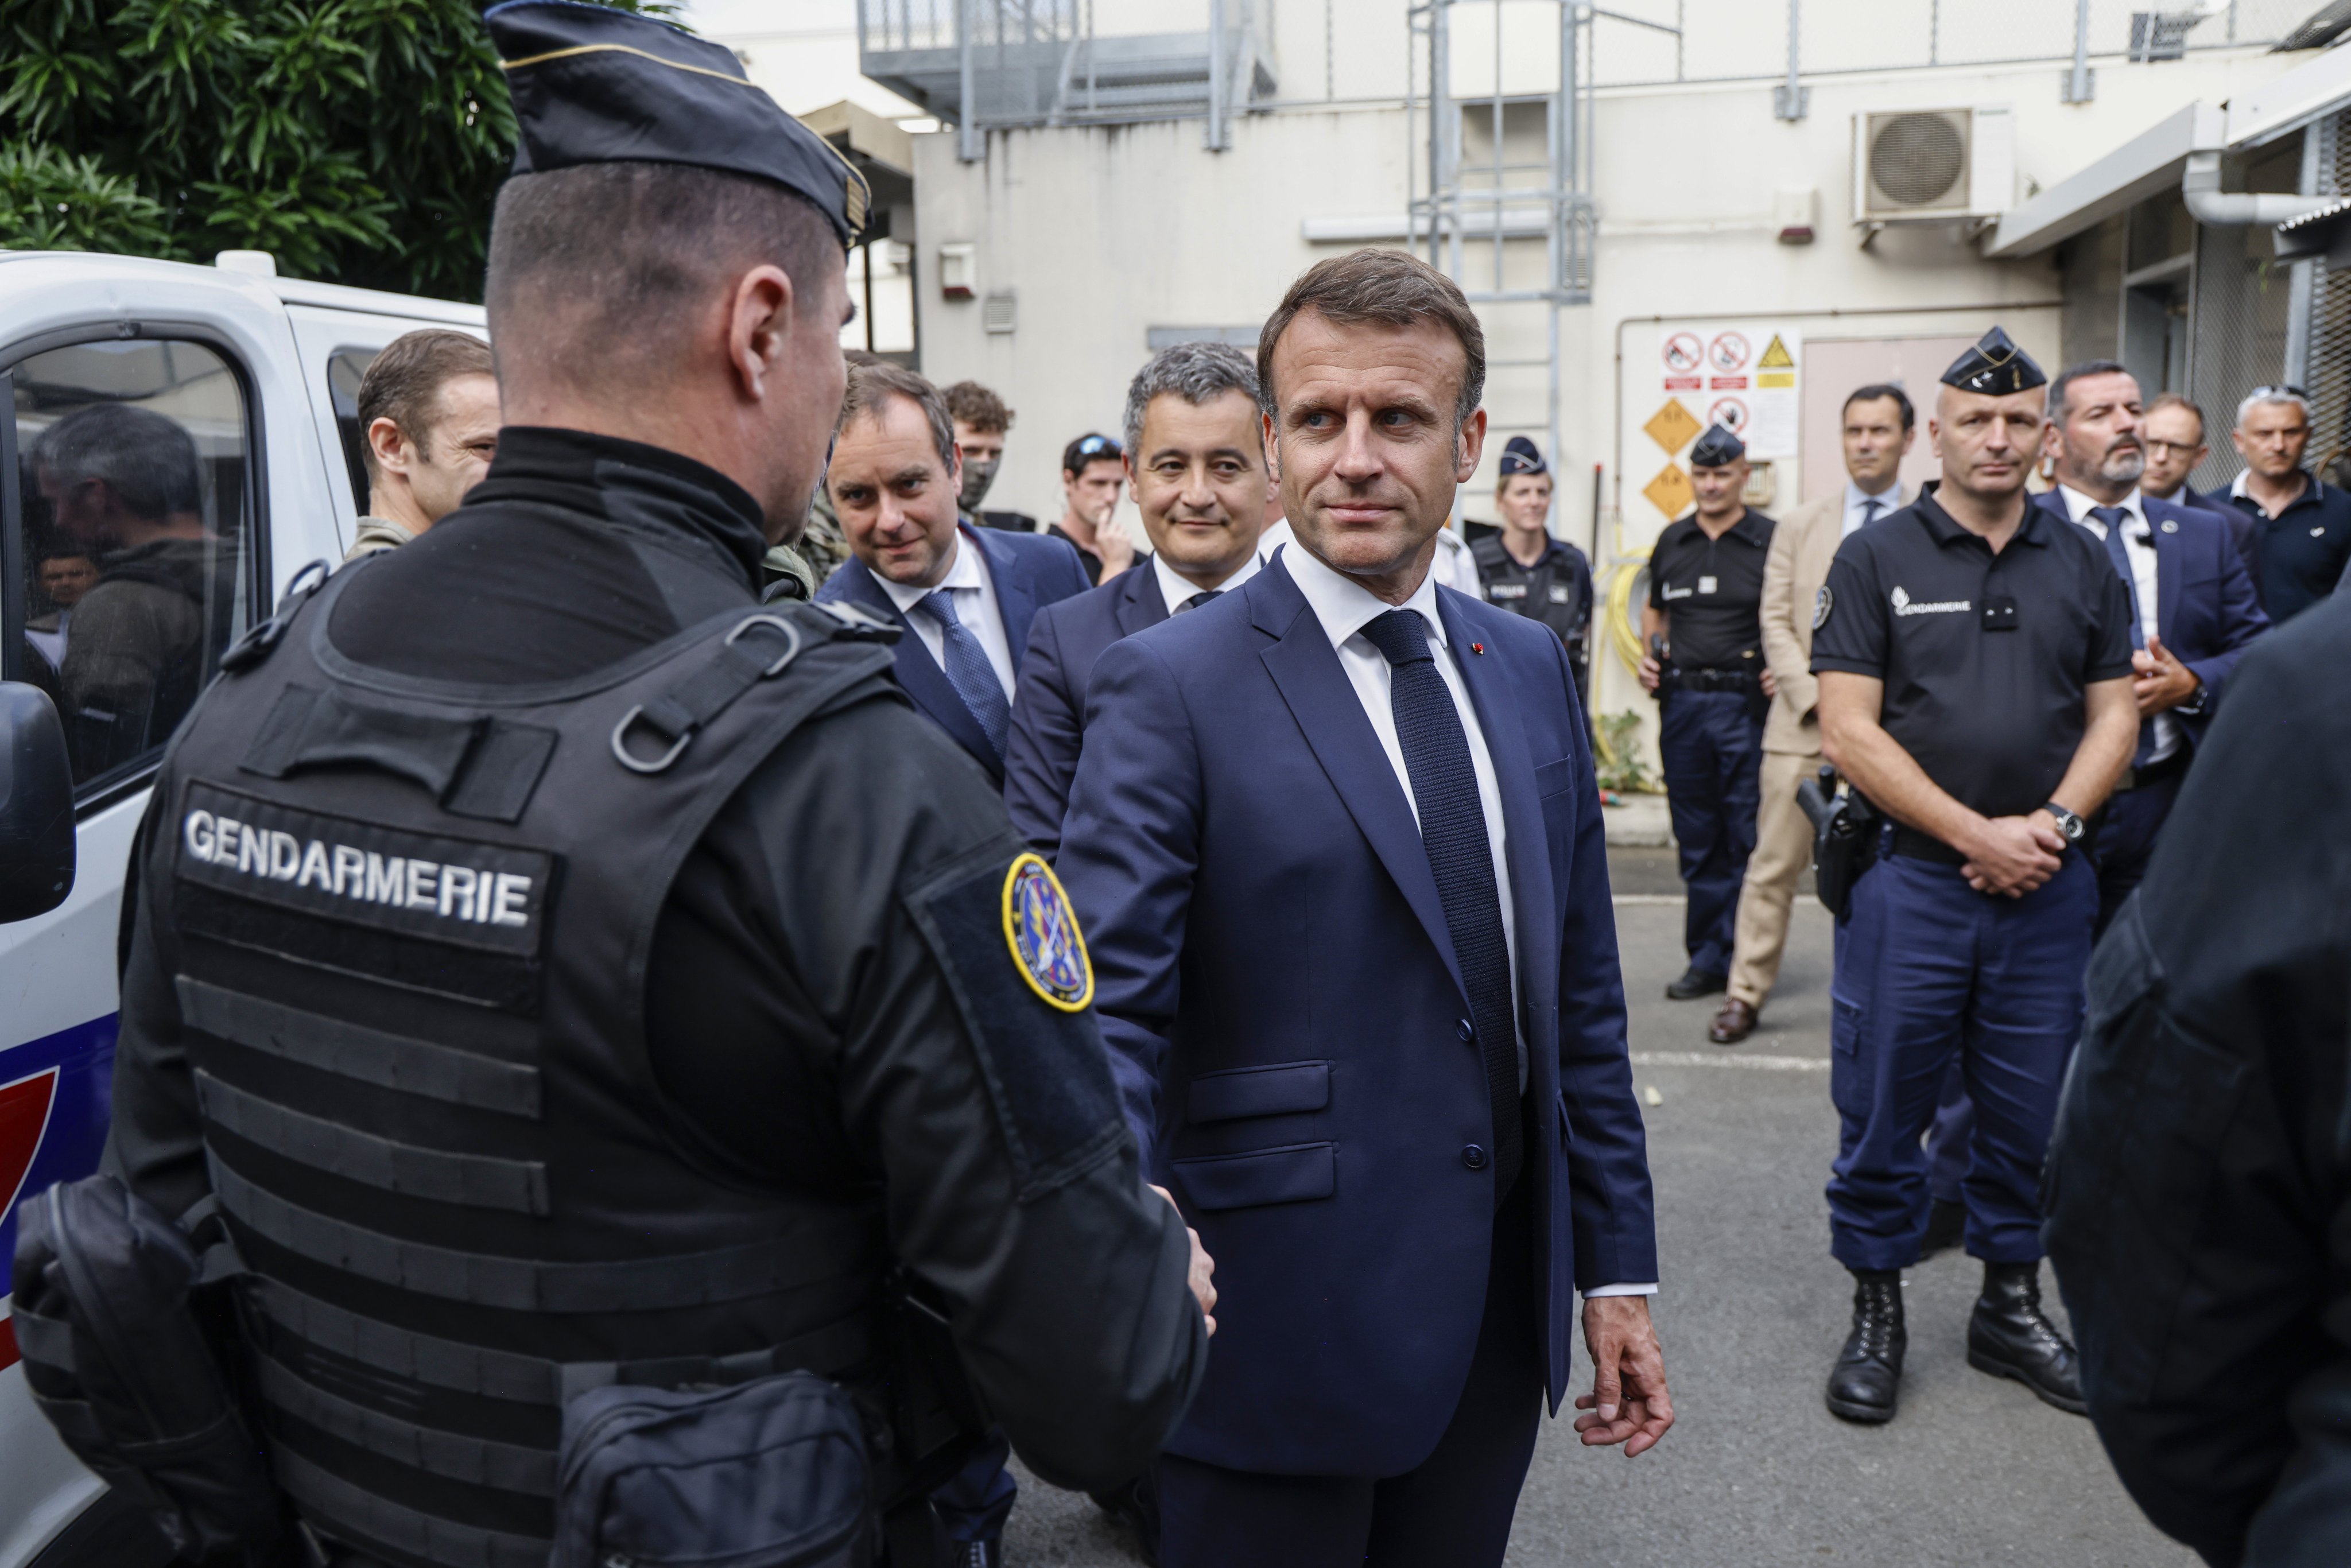 French President Emmanuel Macron (centre) visits the central police station in Noumea, New Caledonia, on Thursday. Photo: EPA-EFE